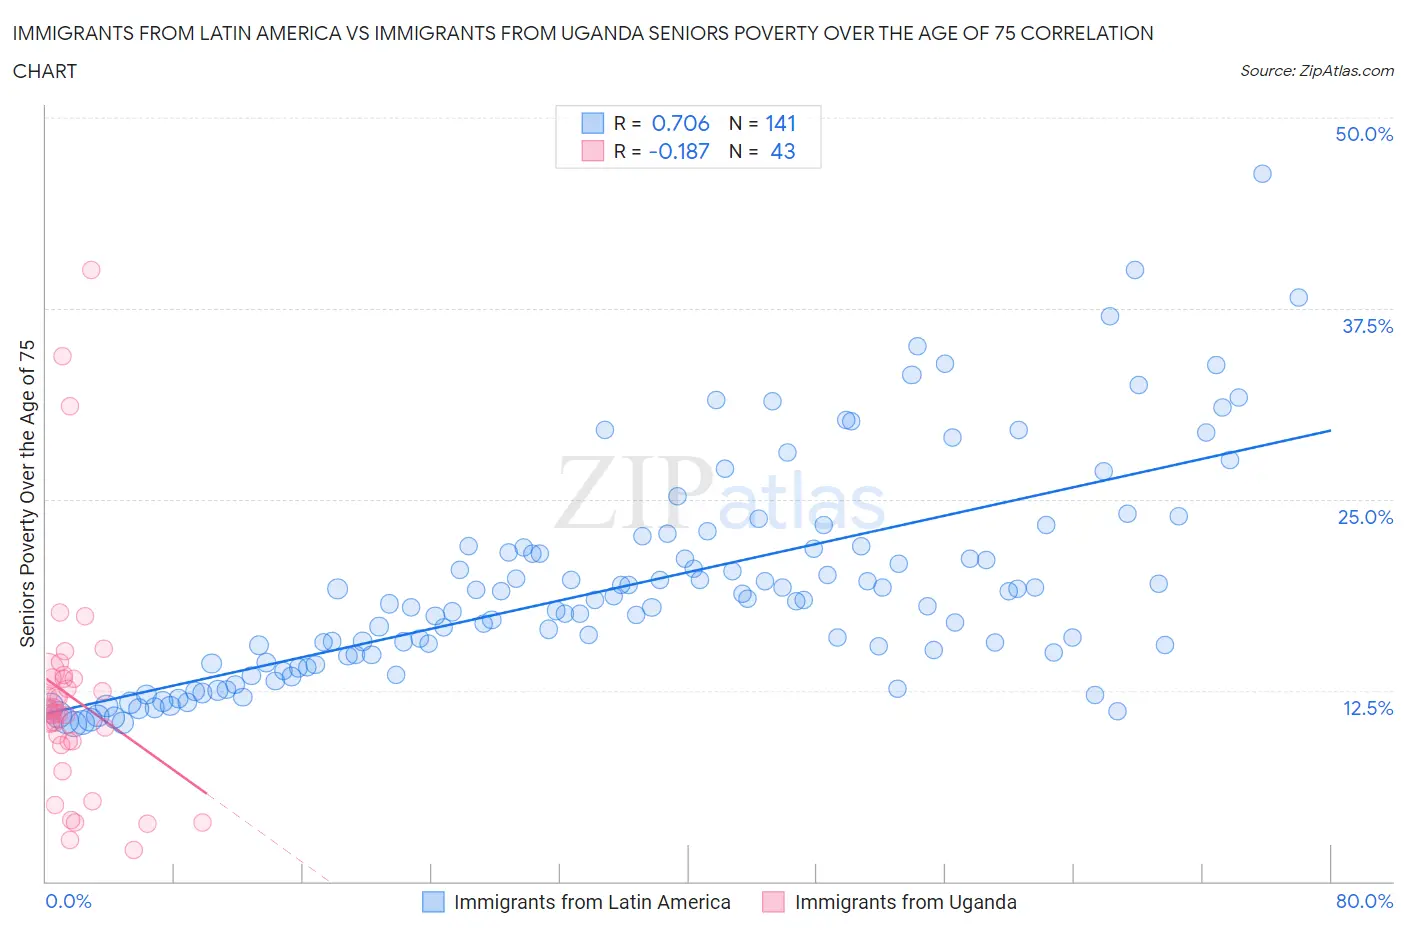 Immigrants from Latin America vs Immigrants from Uganda Seniors Poverty Over the Age of 75